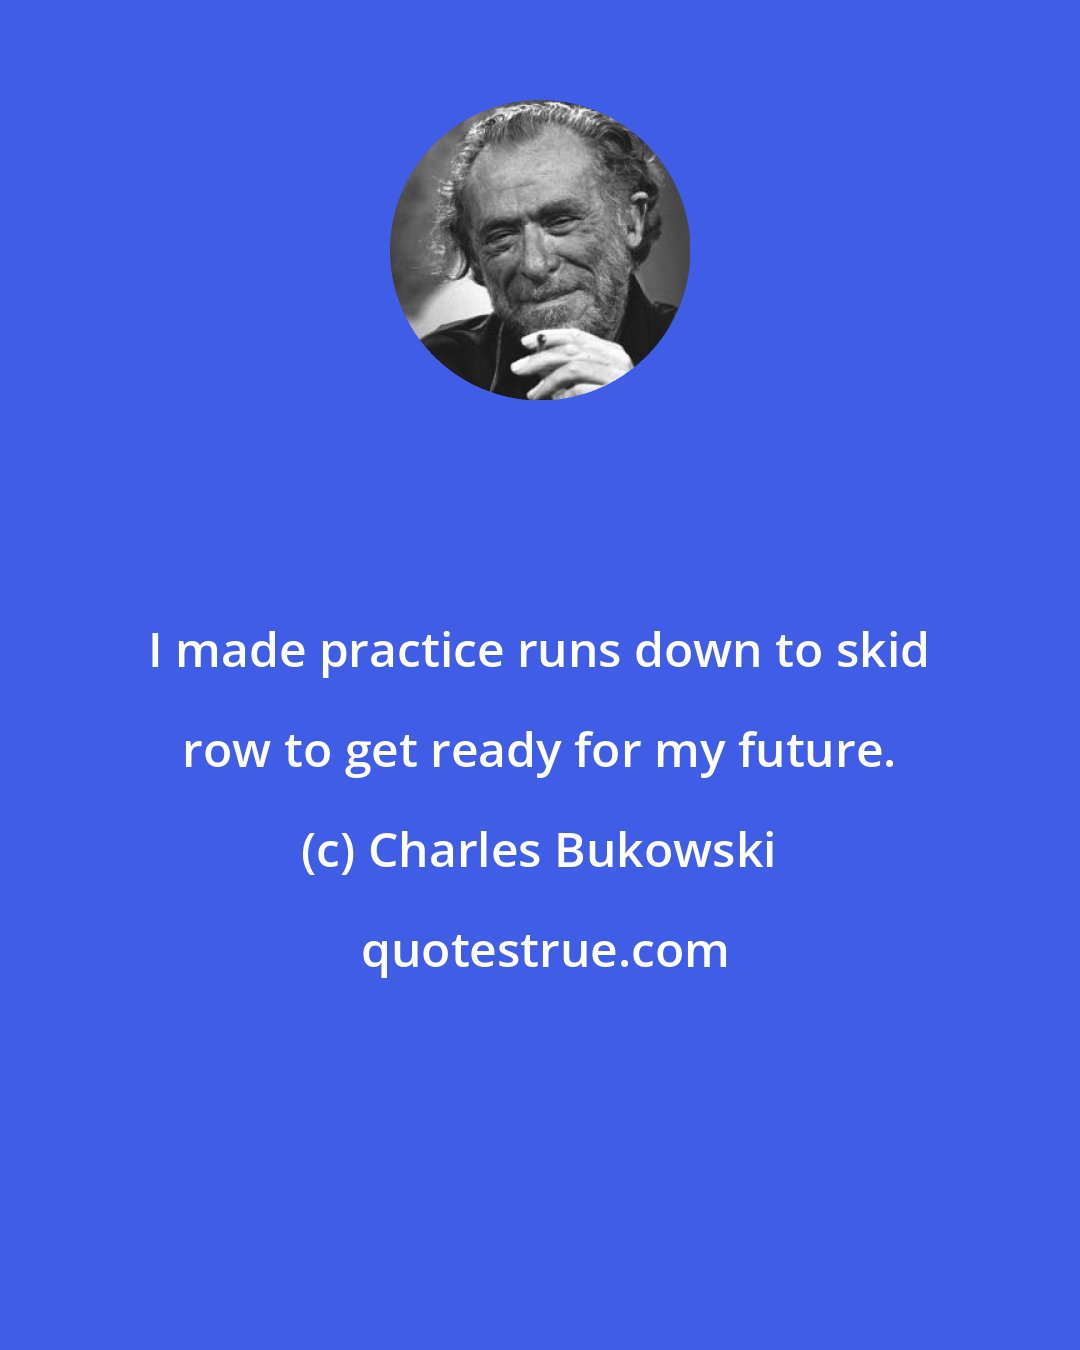 Charles Bukowski: I made practice runs down to skid row to get ready for my future.